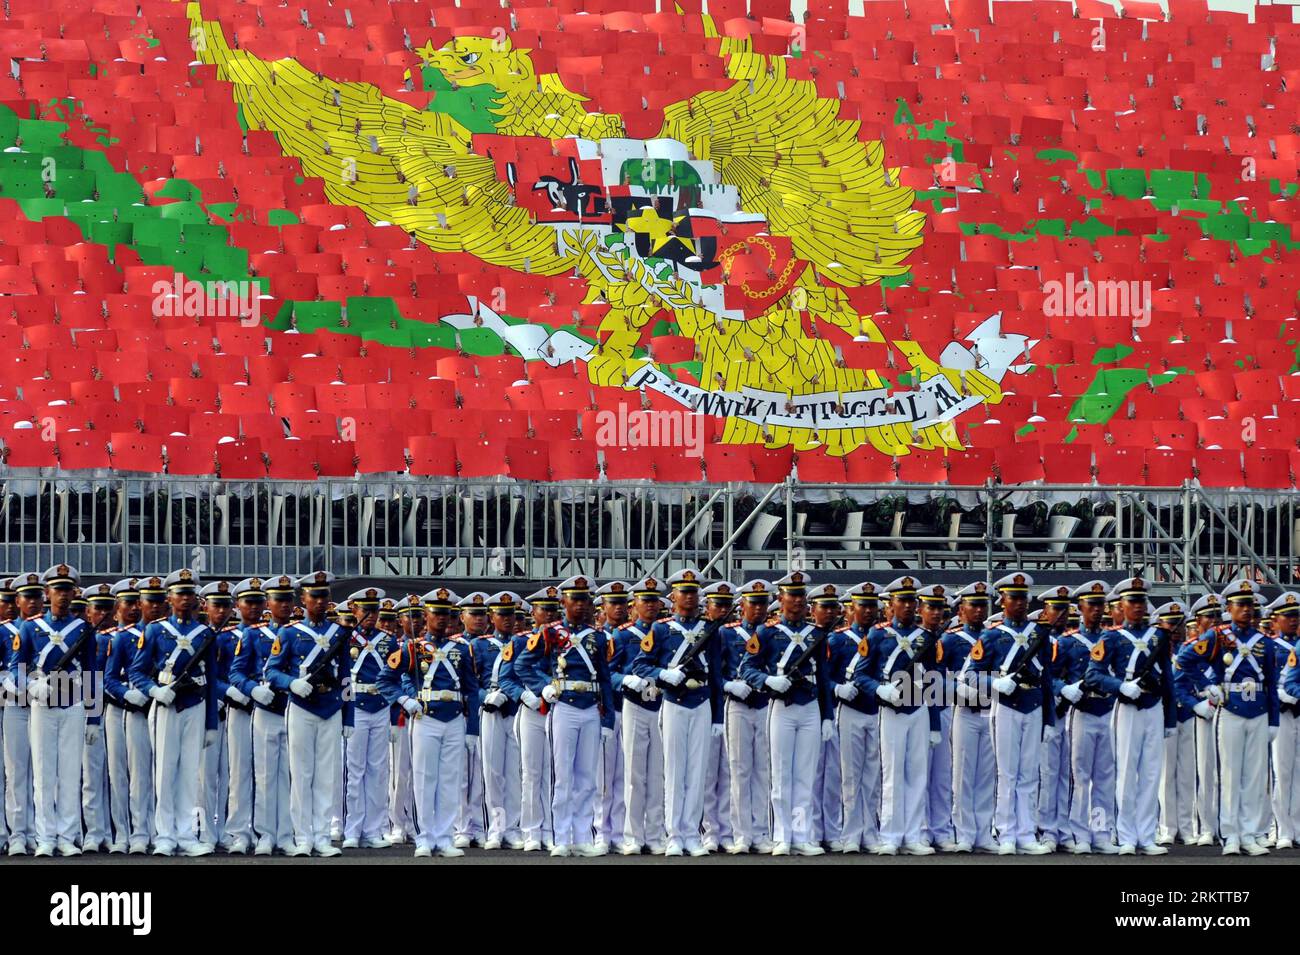 Bildnummer: 58548397  Datum: 03.10.2012  Copyright: imago/Xinhua (121003) -- JAKARTA, Oct. 3, 2012 (Xinhua) -- Indonesian Air force soldiers line up in front of the country s symbol of Garuda Pancasila during a rehearsal for the 67th anniversary of Indonesia s National Army at Halim Perdana Kusuma airport in Jakarta, Indonesia, Oct. 3, 2012. Indonesia s National Army Anniversary falls on Oct. 5 every year. (Xinhua/Agung Kuncahya B.) (dzl) INDONESIA-JAKARTA-NATIONAL ARMY ANNIVERSARY-REHEARSAL PUBLICATIONxNOTxINxCHN Gesellschaft Militär Jubiläum Jahrestag x0x xmb 2012 quer      58548397 Date 03 Stock Photo